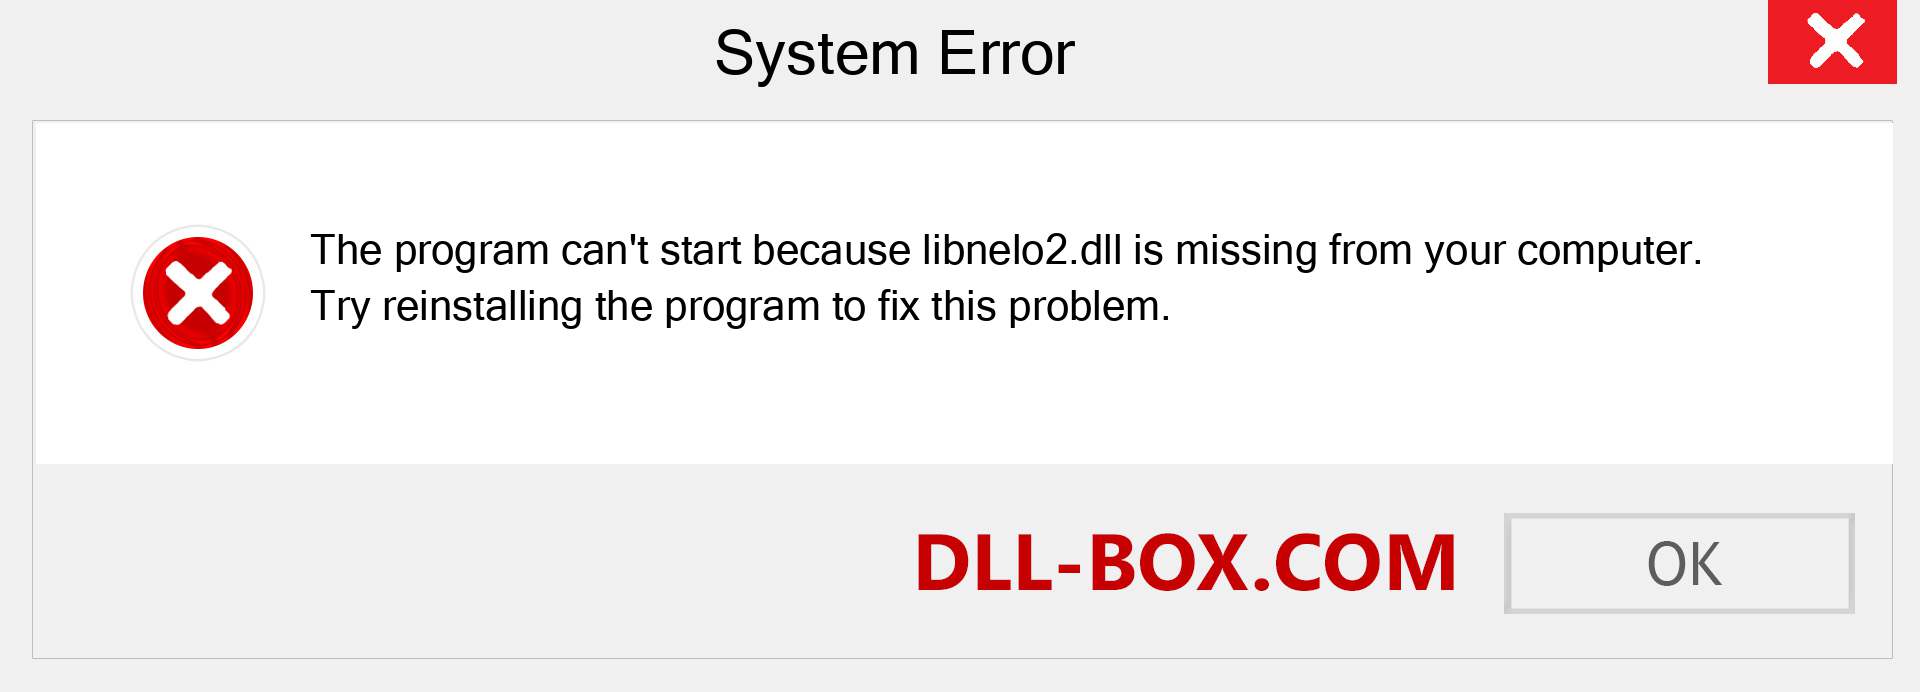  libnelo2.dll file is missing?. Download for Windows 7, 8, 10 - Fix  libnelo2 dll Missing Error on Windows, photos, images